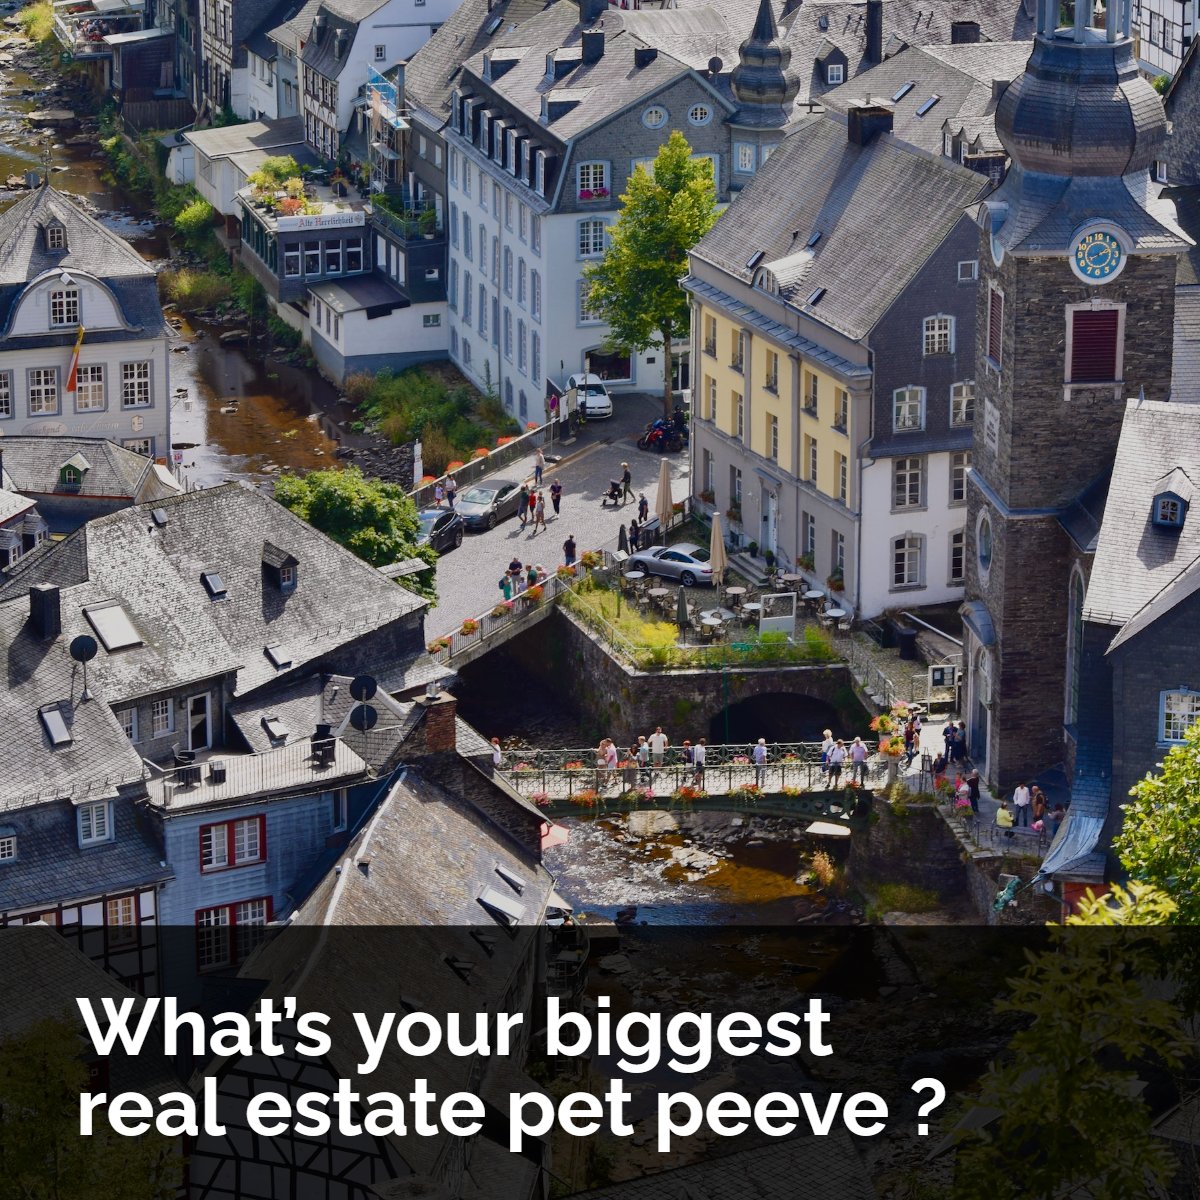 Do you have any Real Estate pet peeves?

Feel free to share them below!

#RealEstate #DreamHome